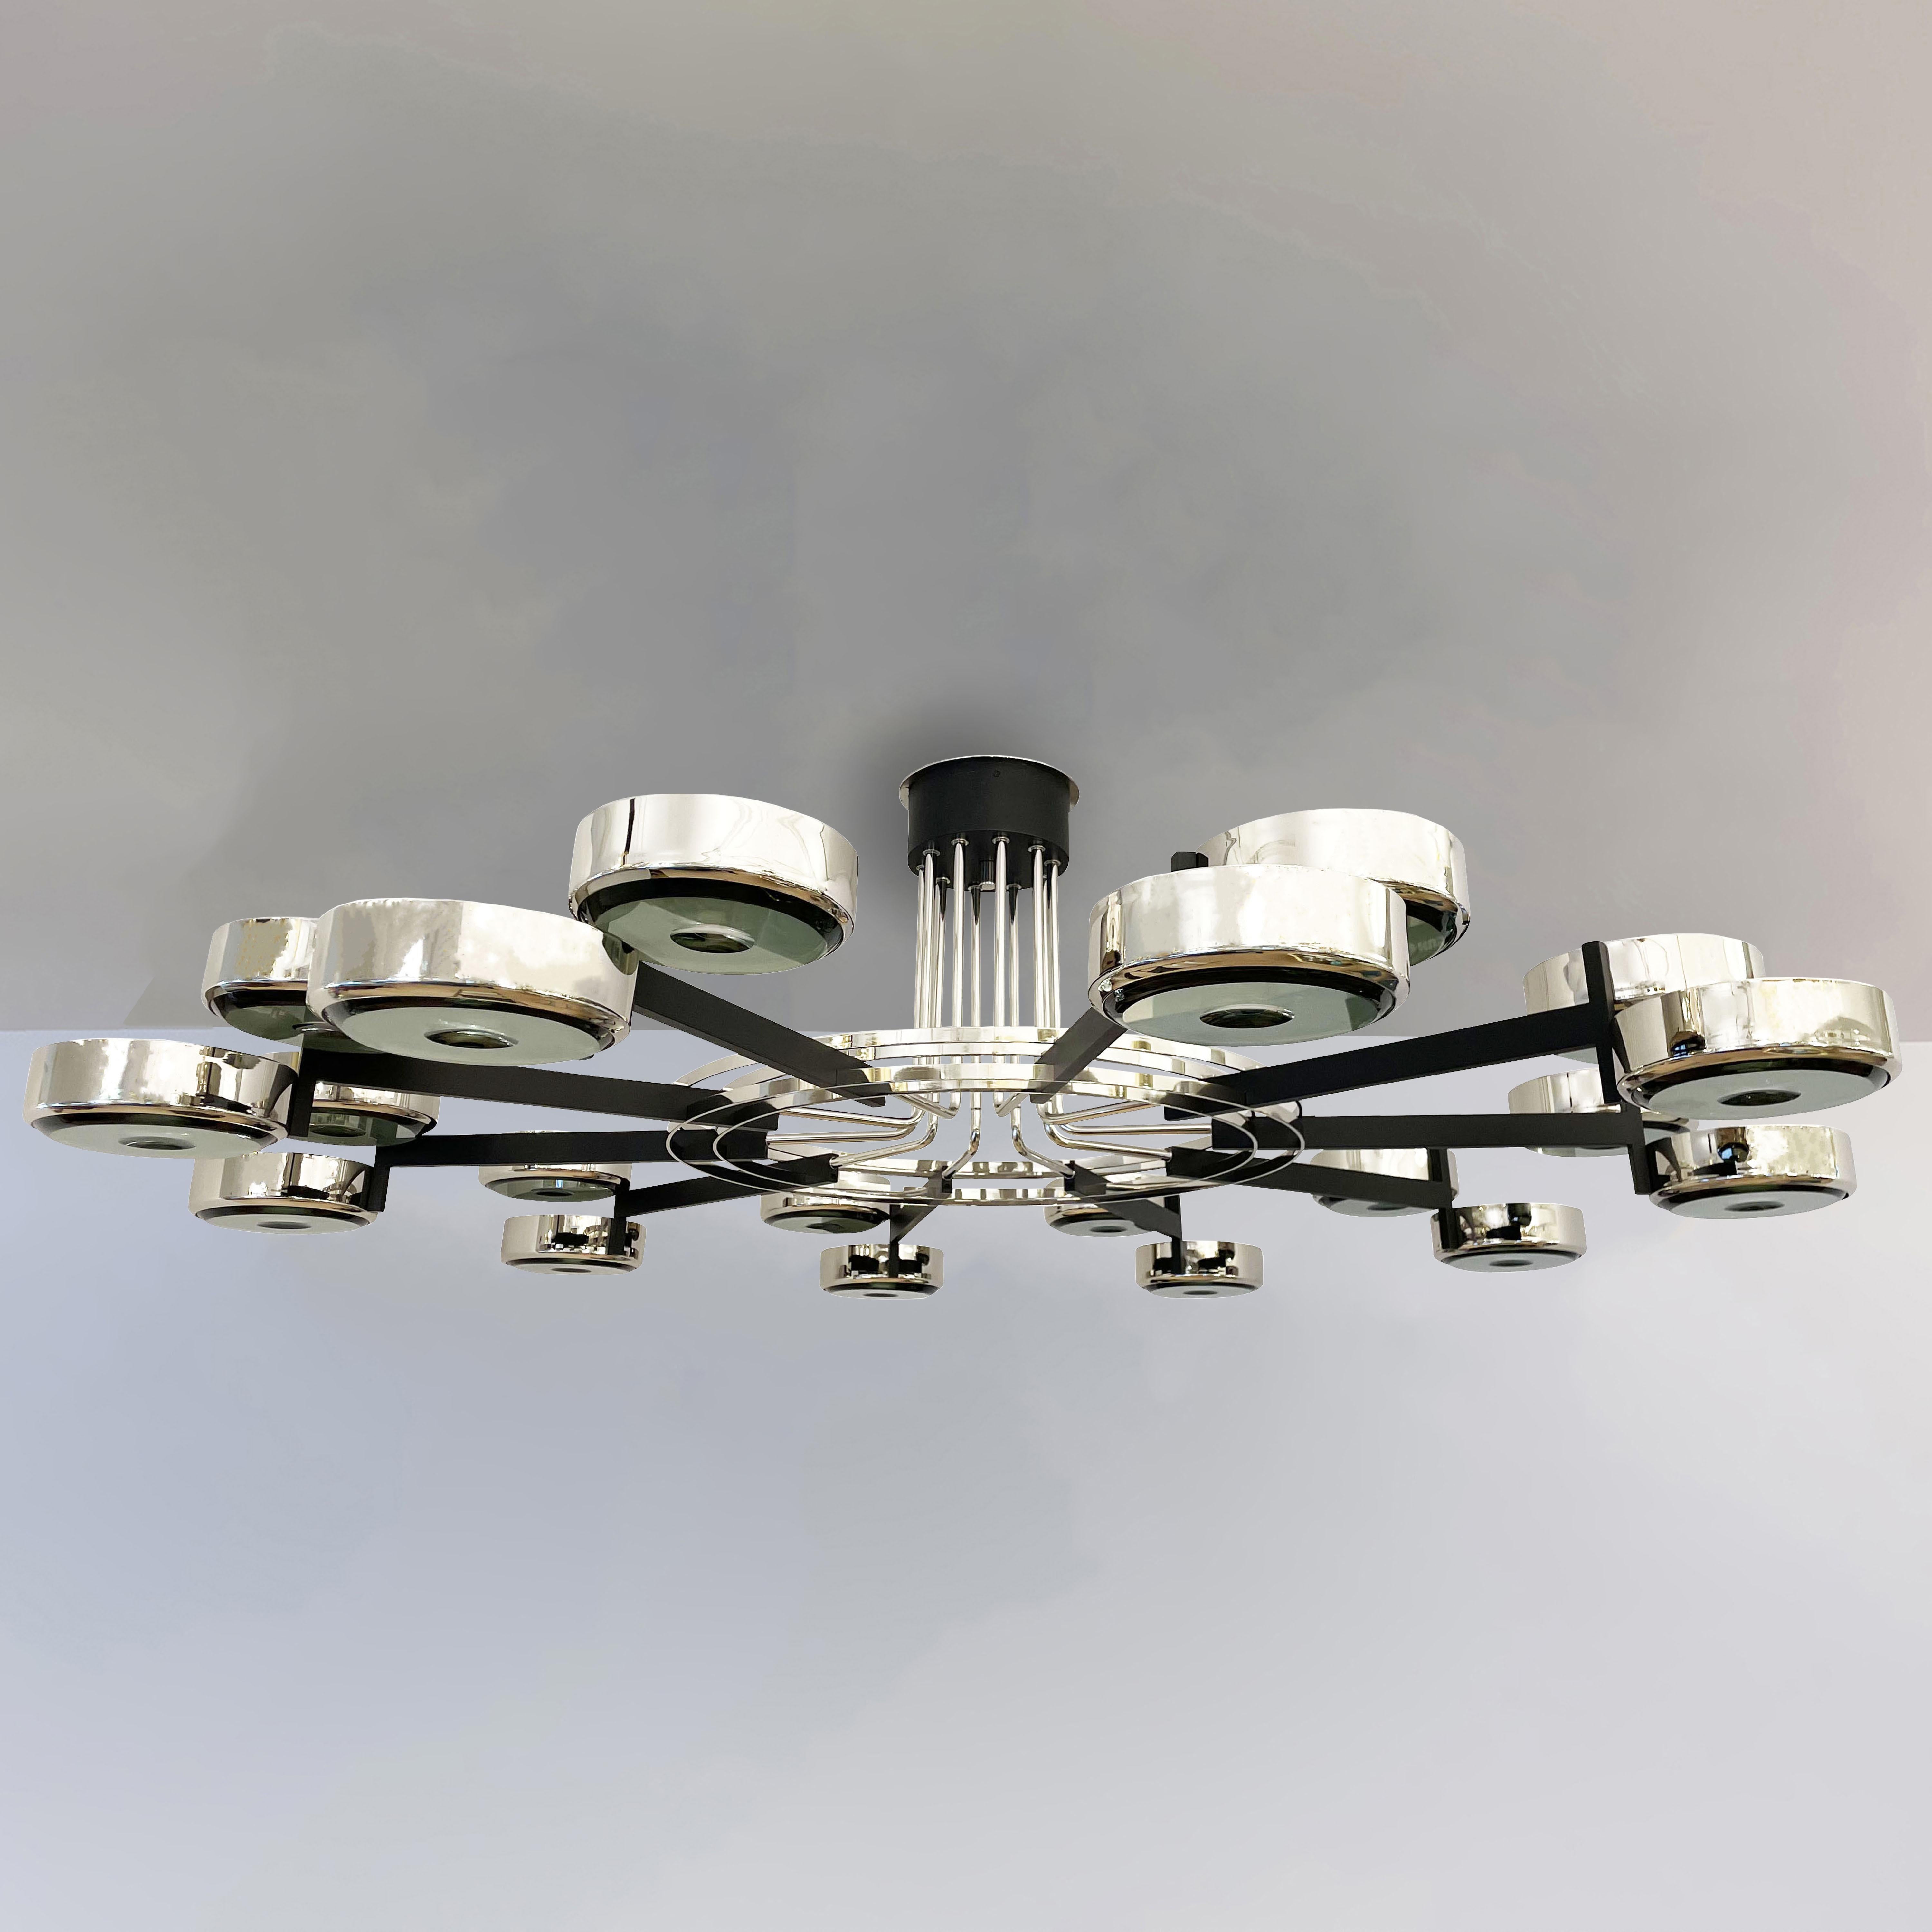 The Eclissi N.20 ceiling light is the largest member of the Eclissi family spanning a colossal 70” in diameter. The piece is designed around ten pairs of eclipsing shades bound by a series of brass rings and a distinctive set of stems. Shown in